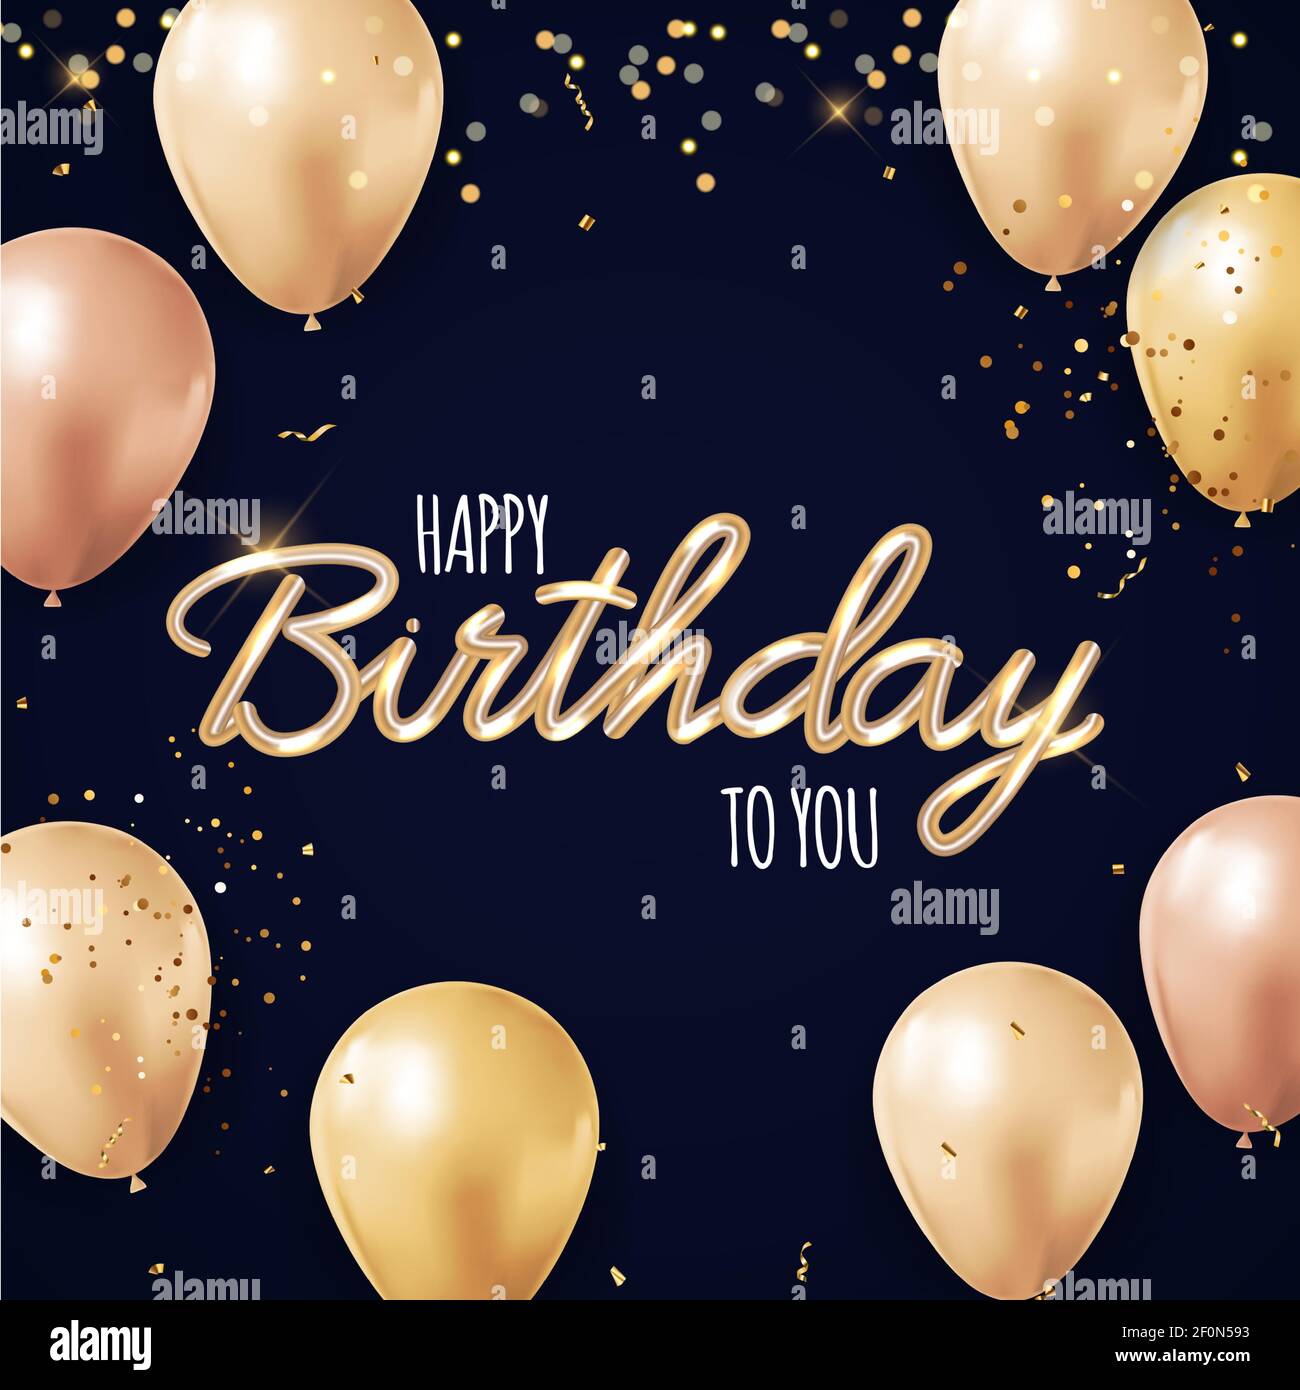 Happy Birthday Ribbon With Golden Balloons Background Stock